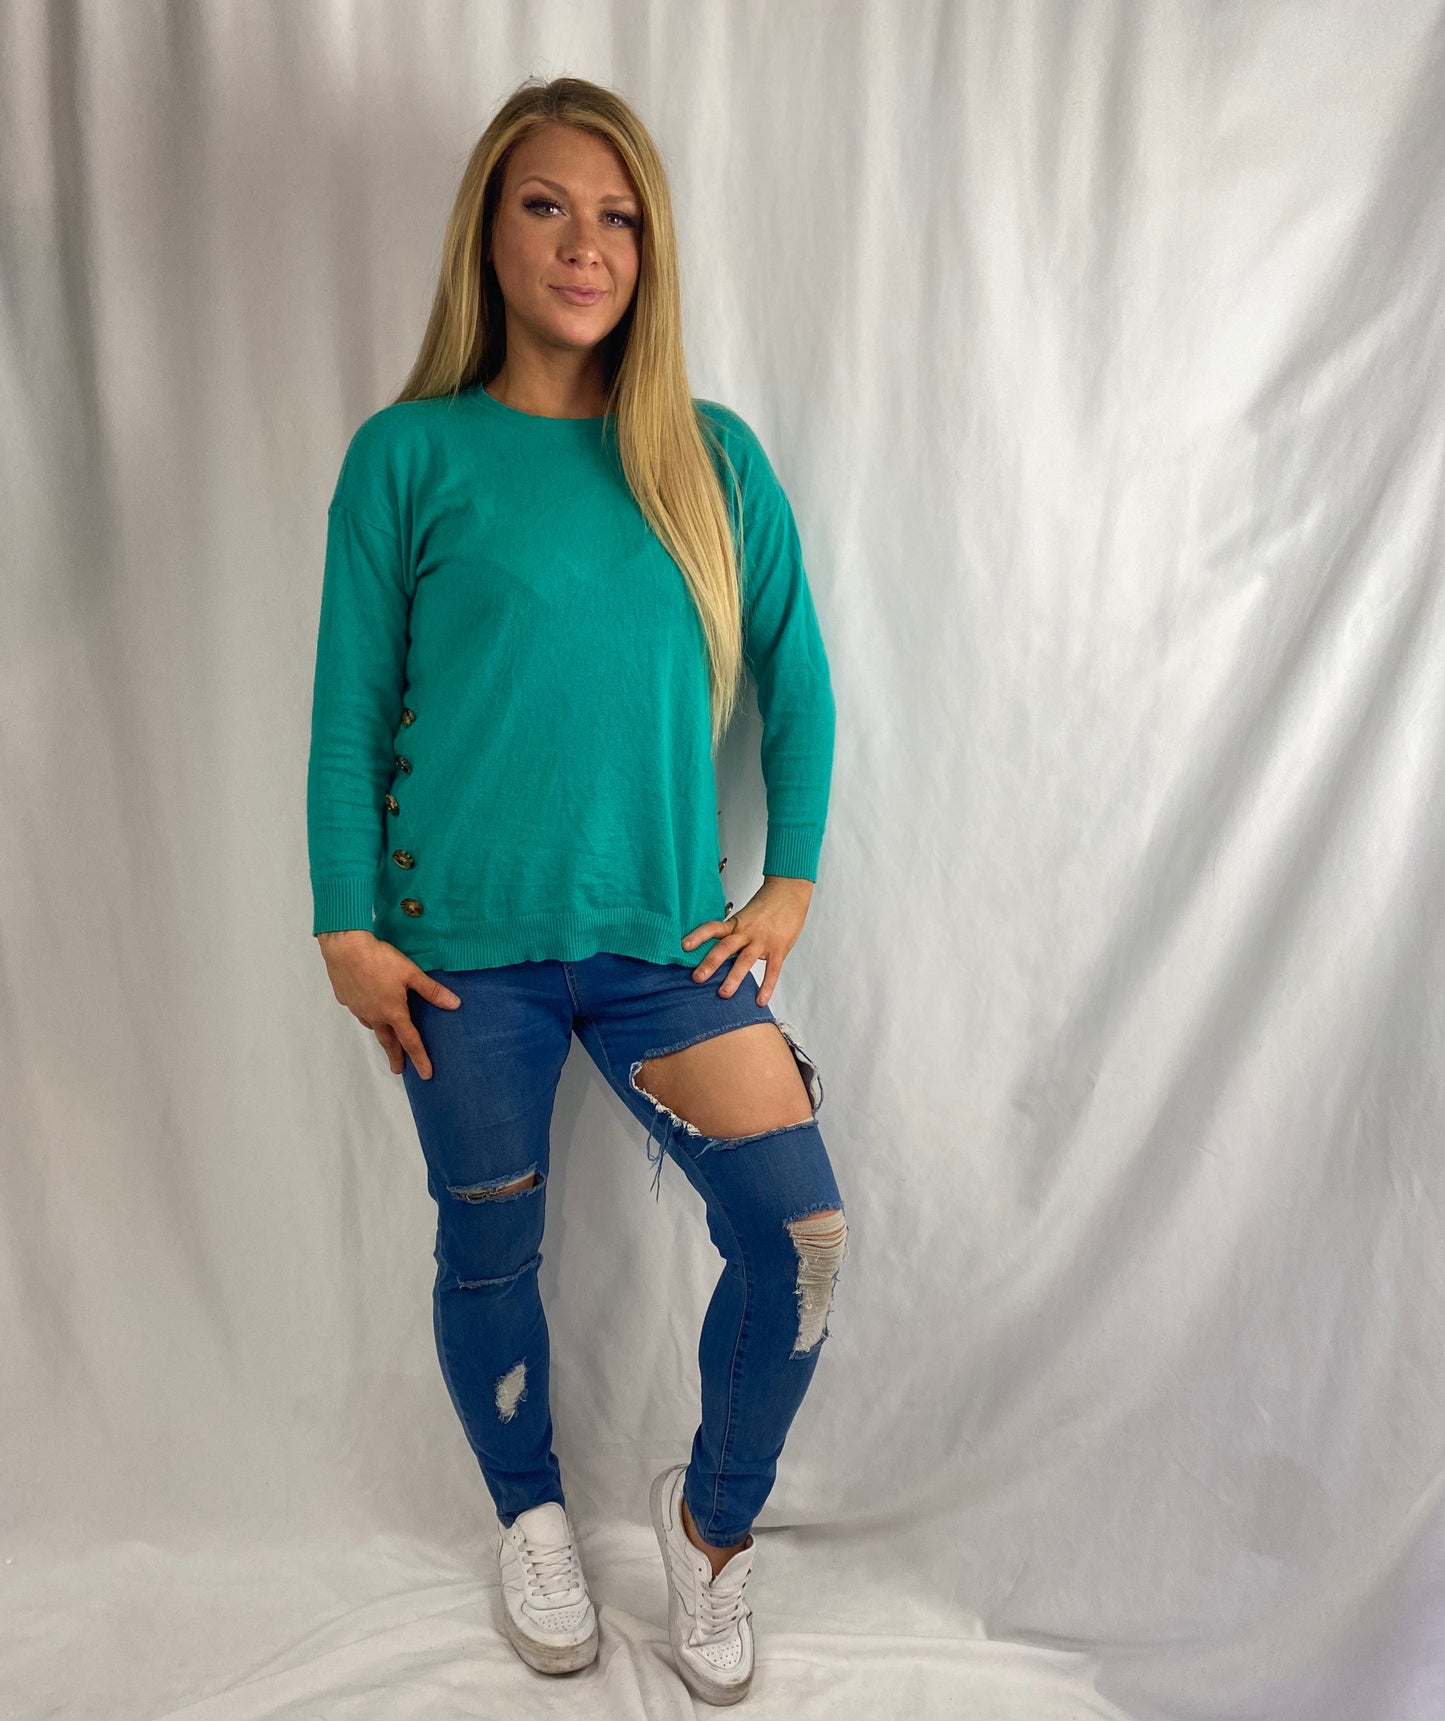 TRINITY Teal turquoise Long Sleeve Sweater Buttons Top Dresses Aambers Goodies xx 